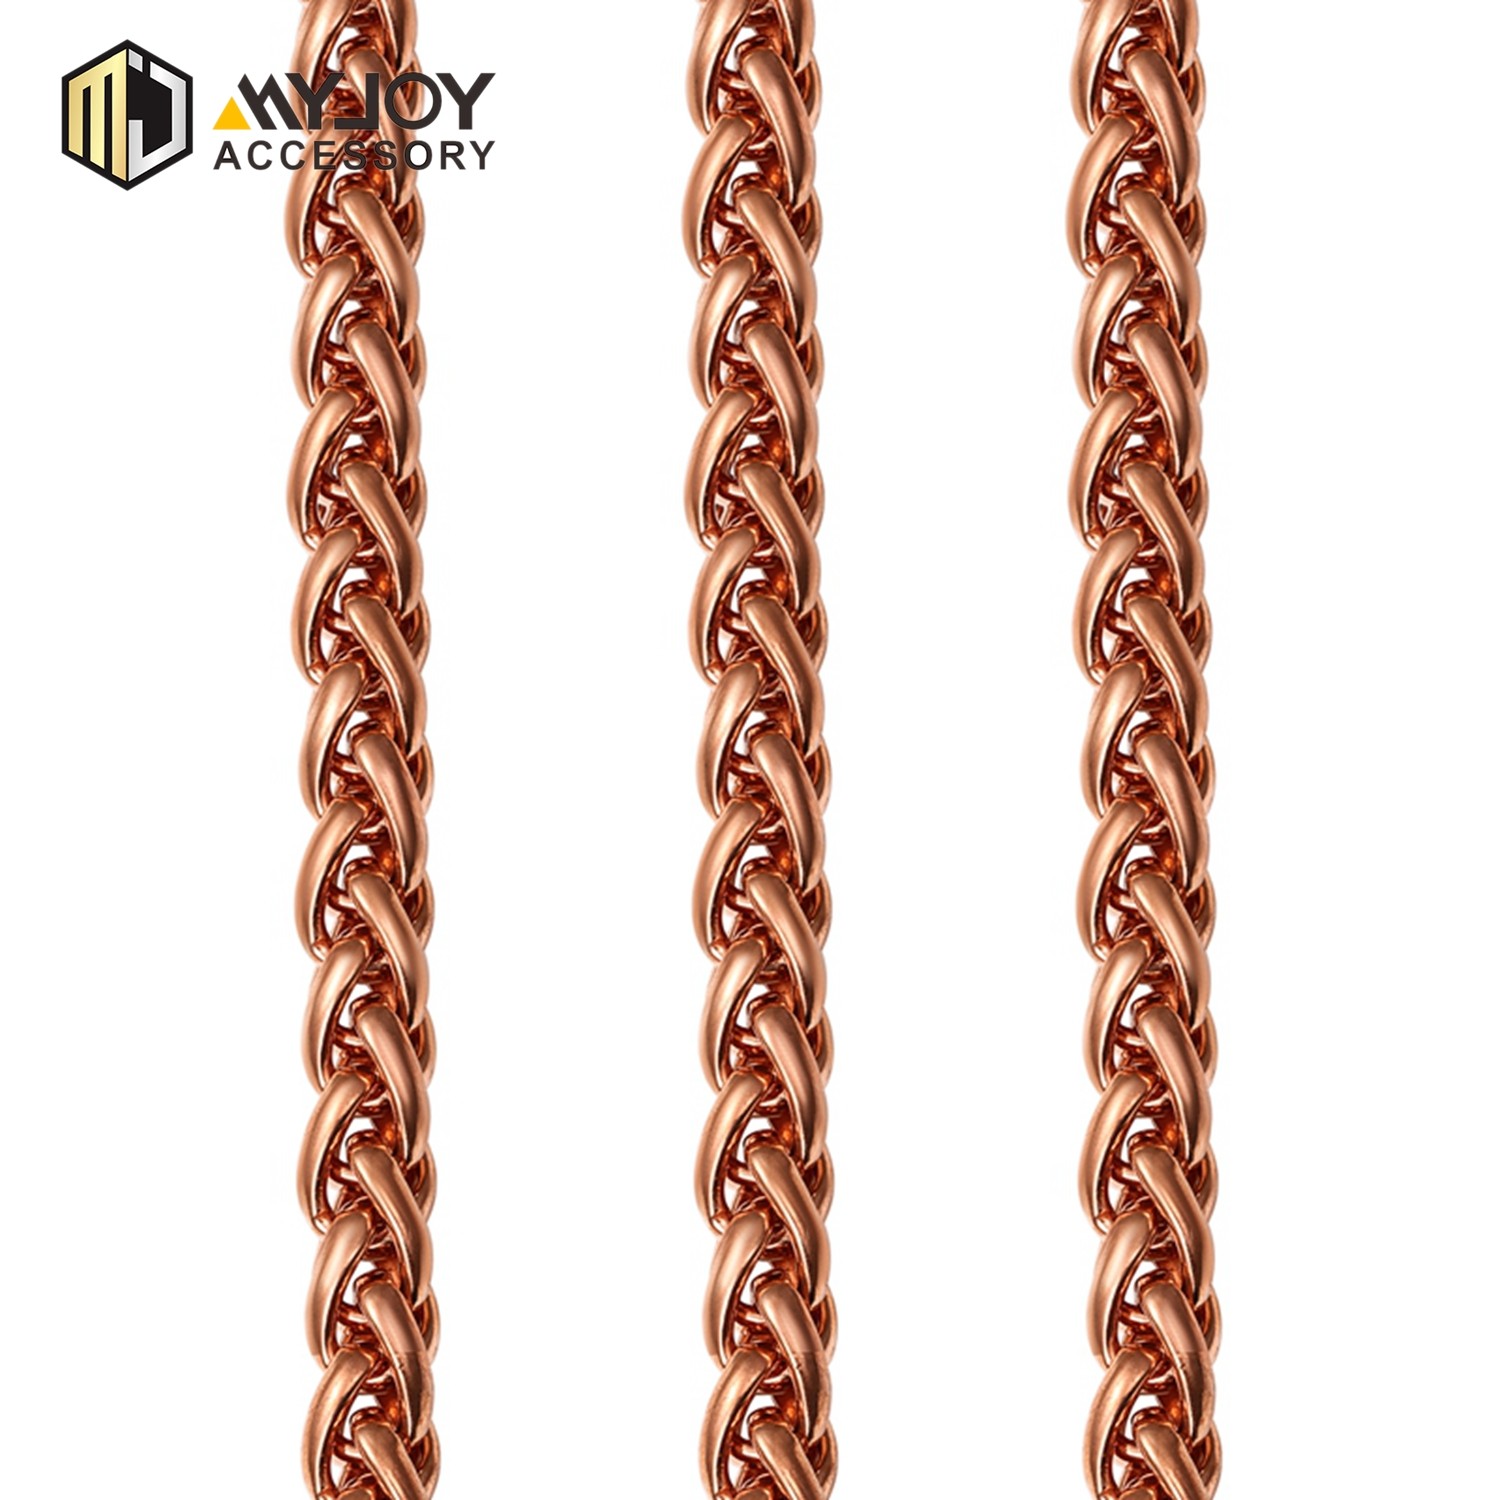 MYJOY chains chain strap Suppliers for purses-2